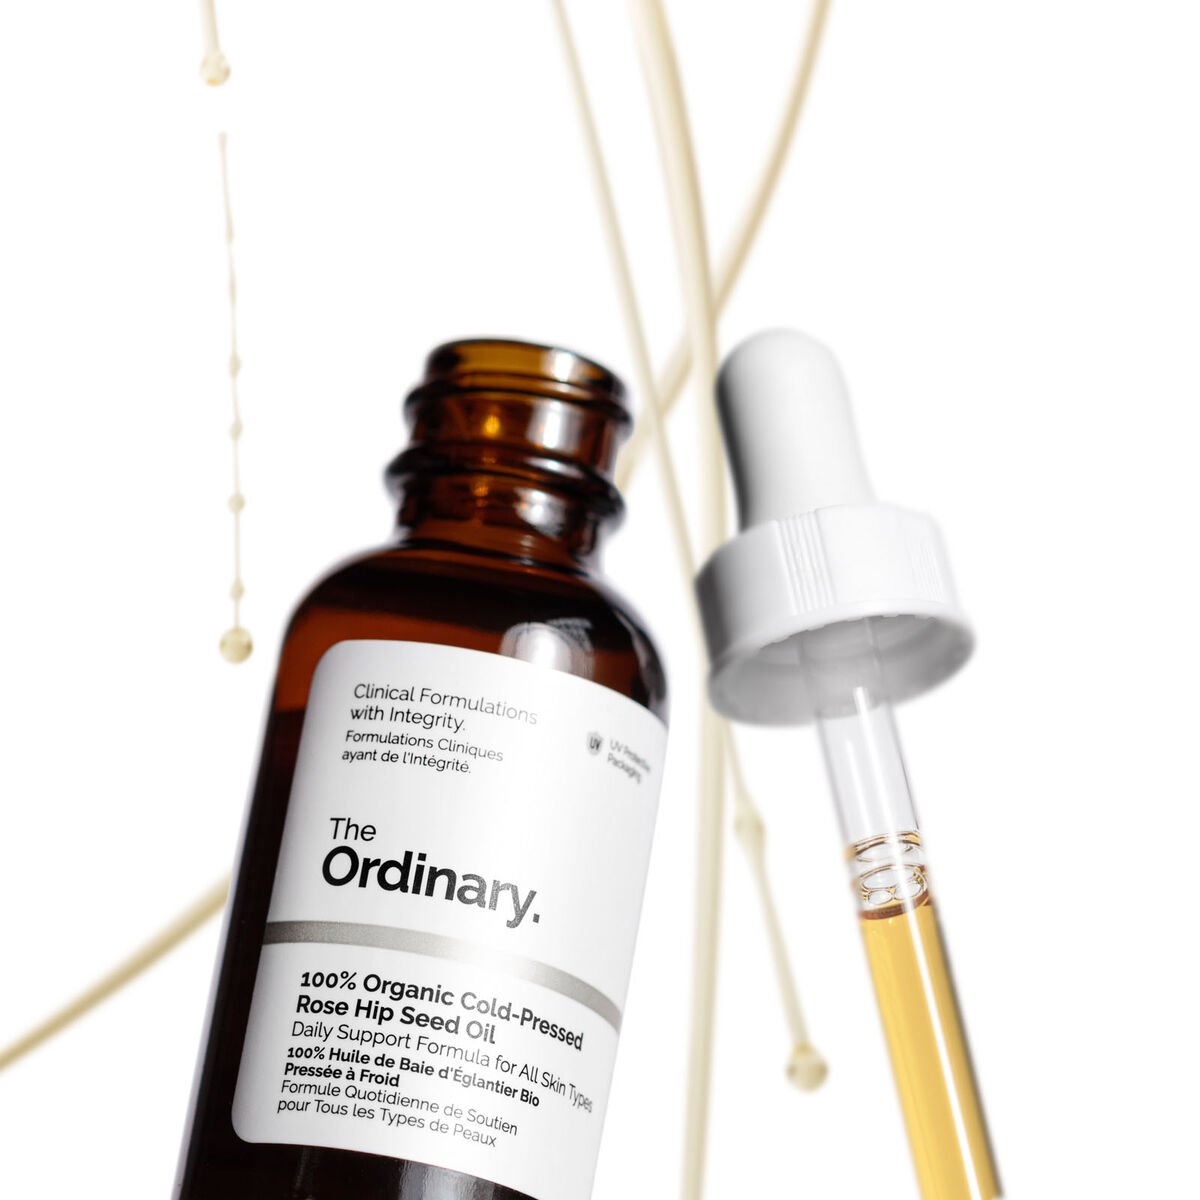 The Ordinary 100% Organic Cold-Pressed Rose Hip Seed Oil at Socialite Beauty Canada